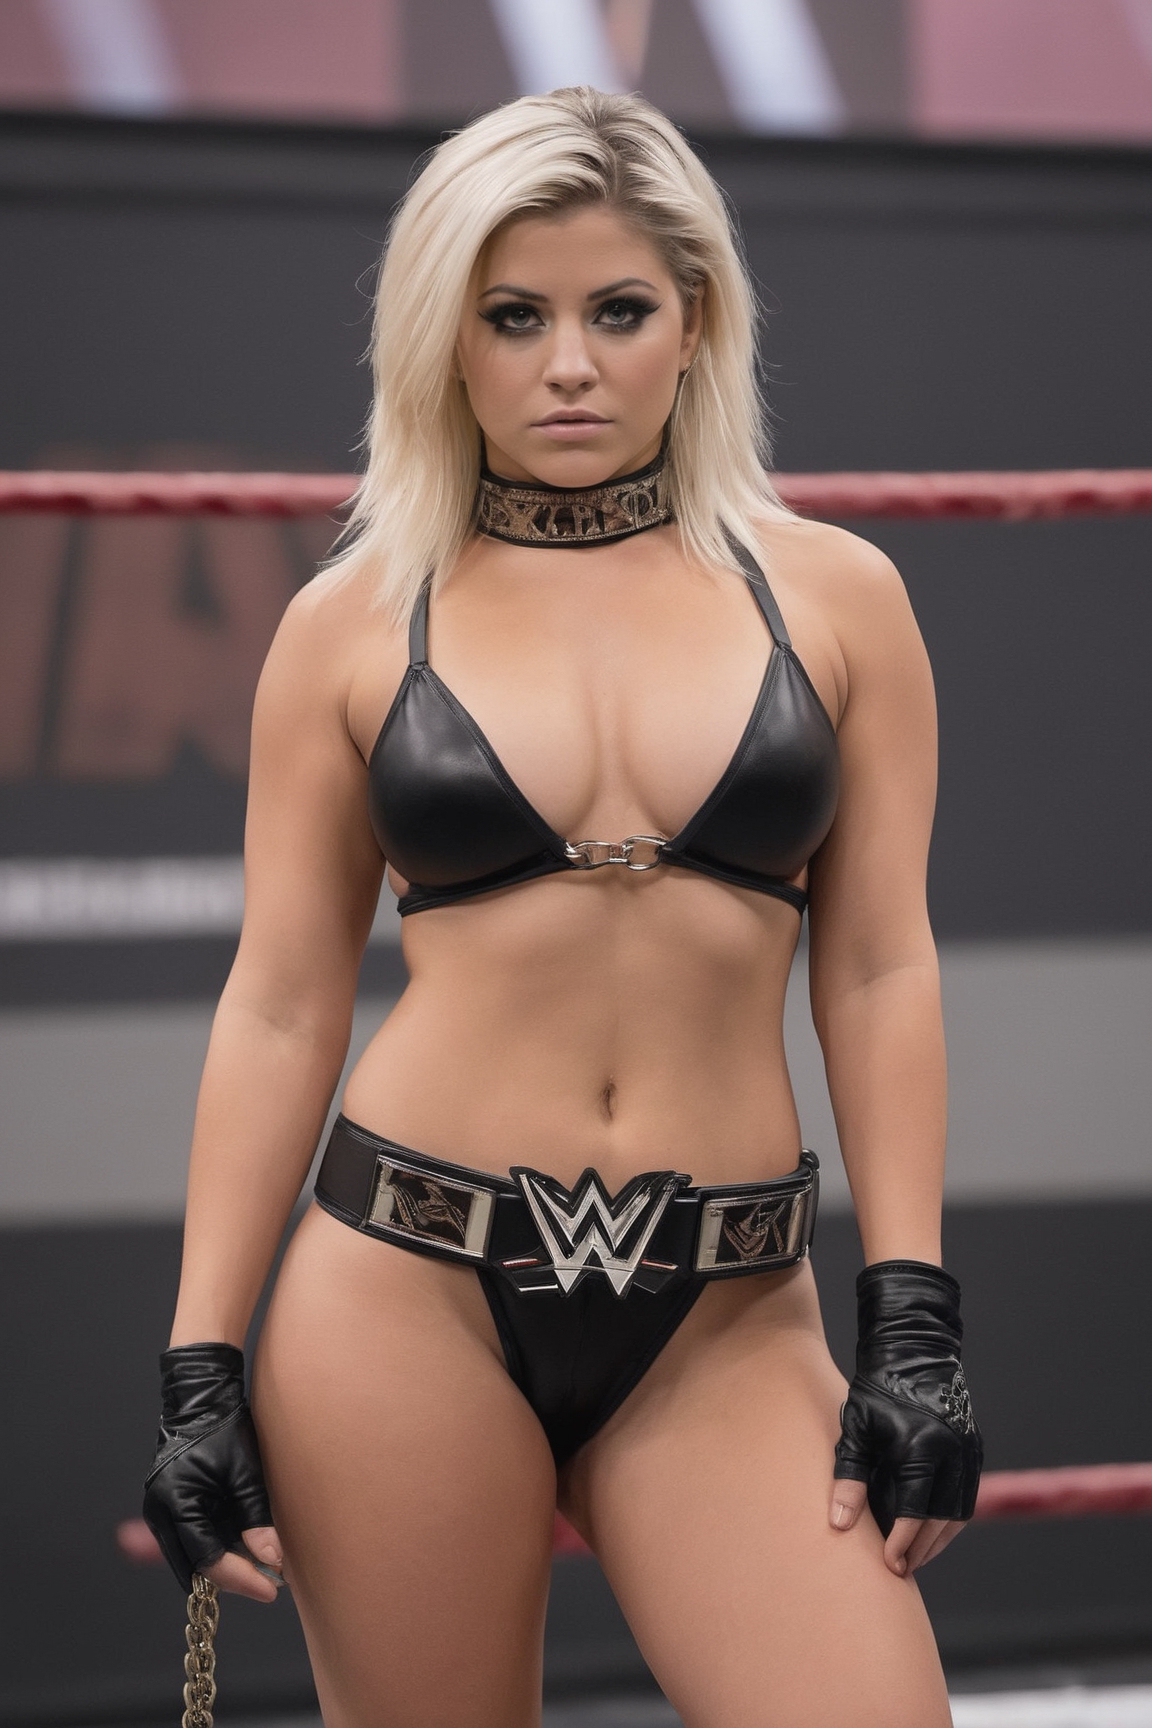 Best of Alexa bliss nude pictures